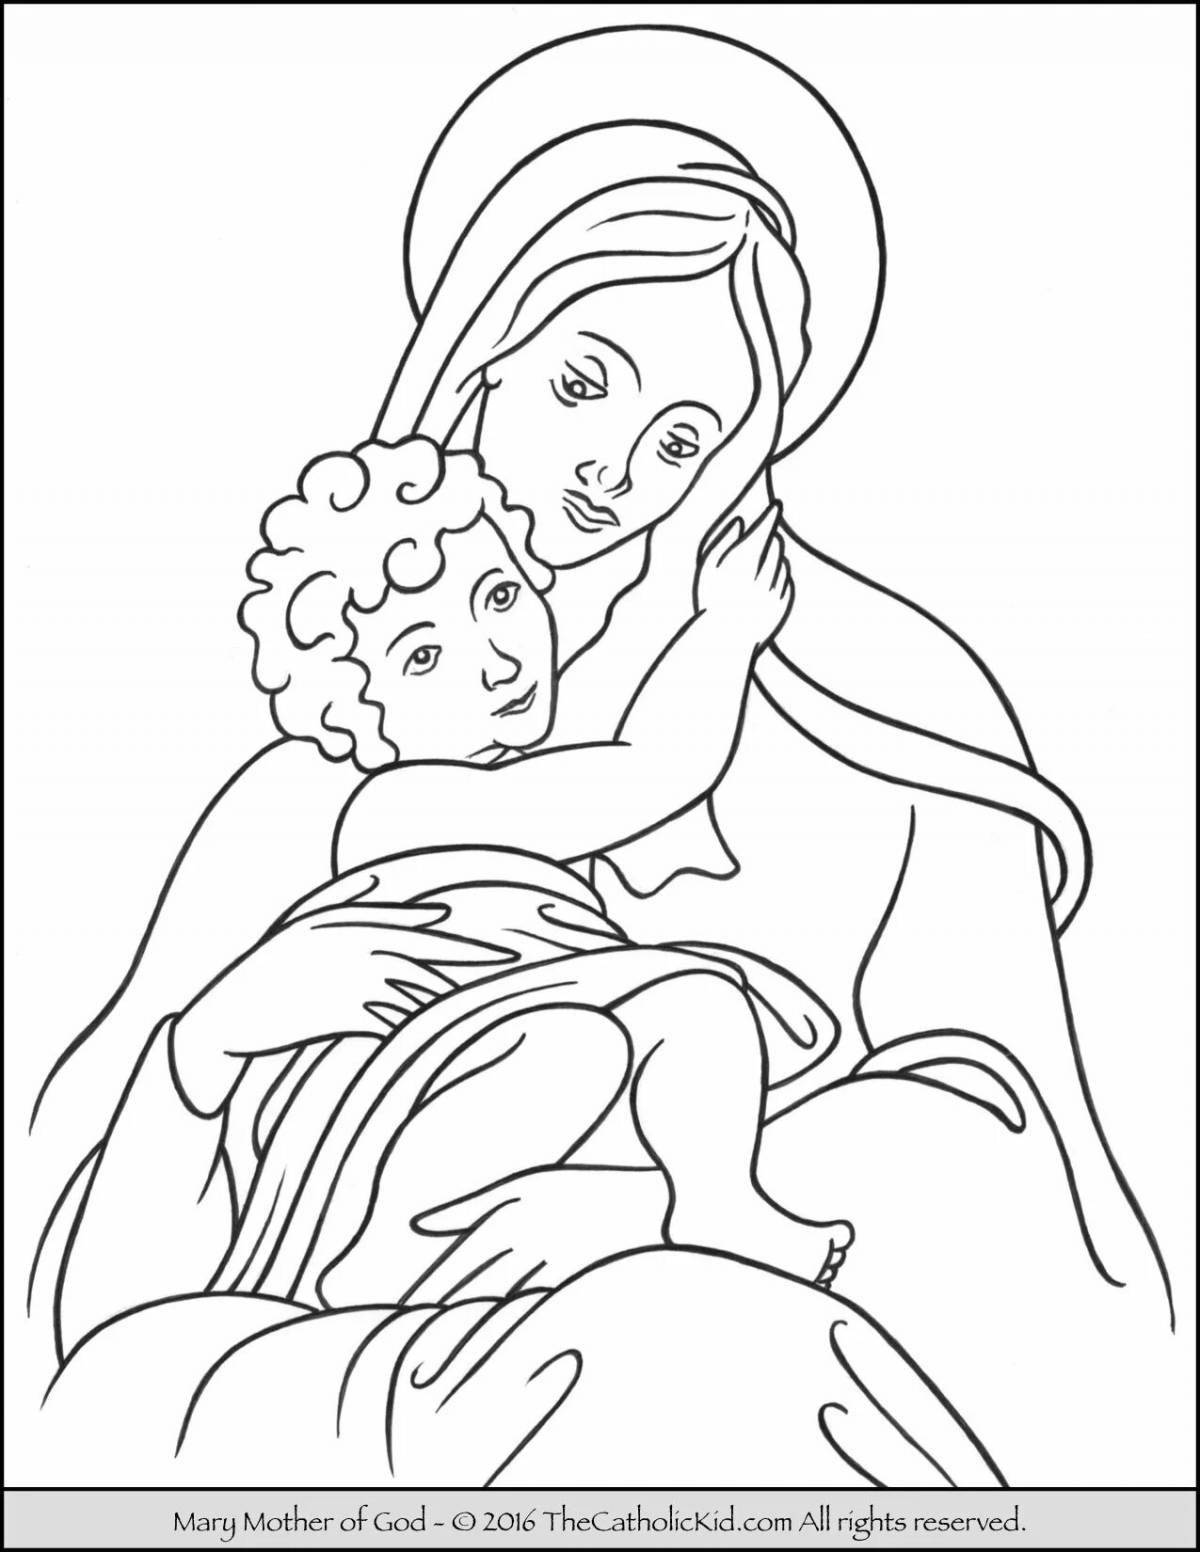 Virgin Mary and Child #6